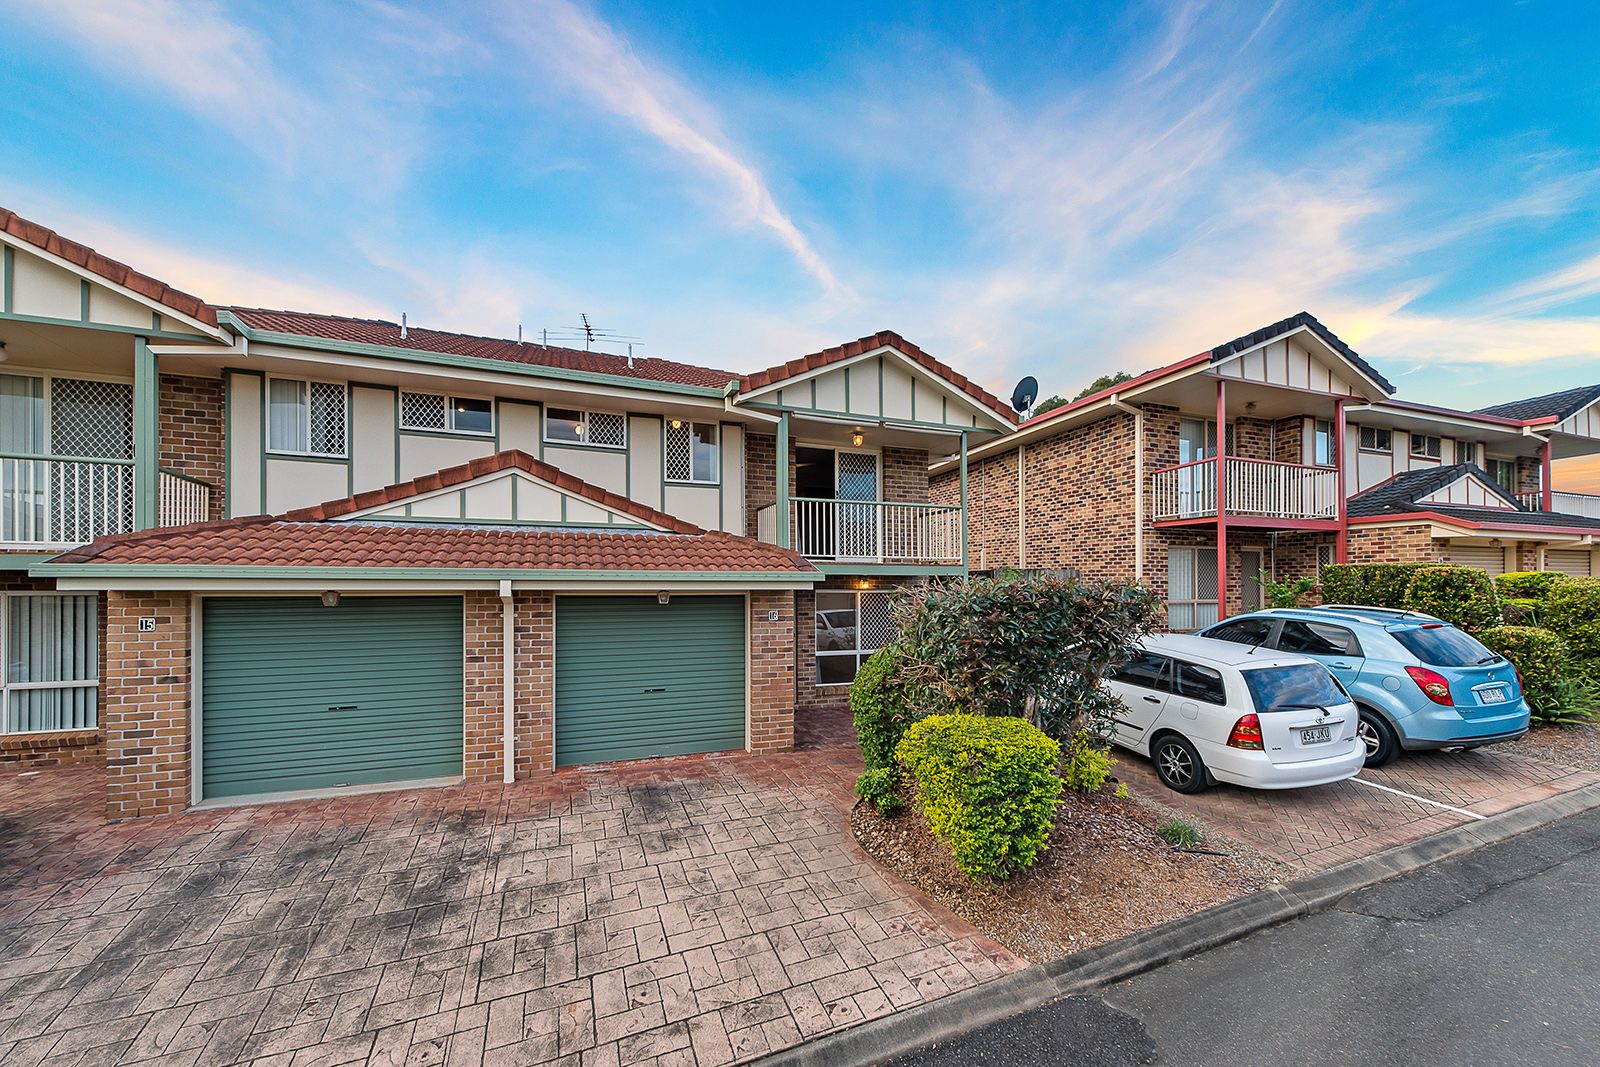 3 bedrooms Townhouse in 16/670 Trouts Road ASPLEY QLD, 4034